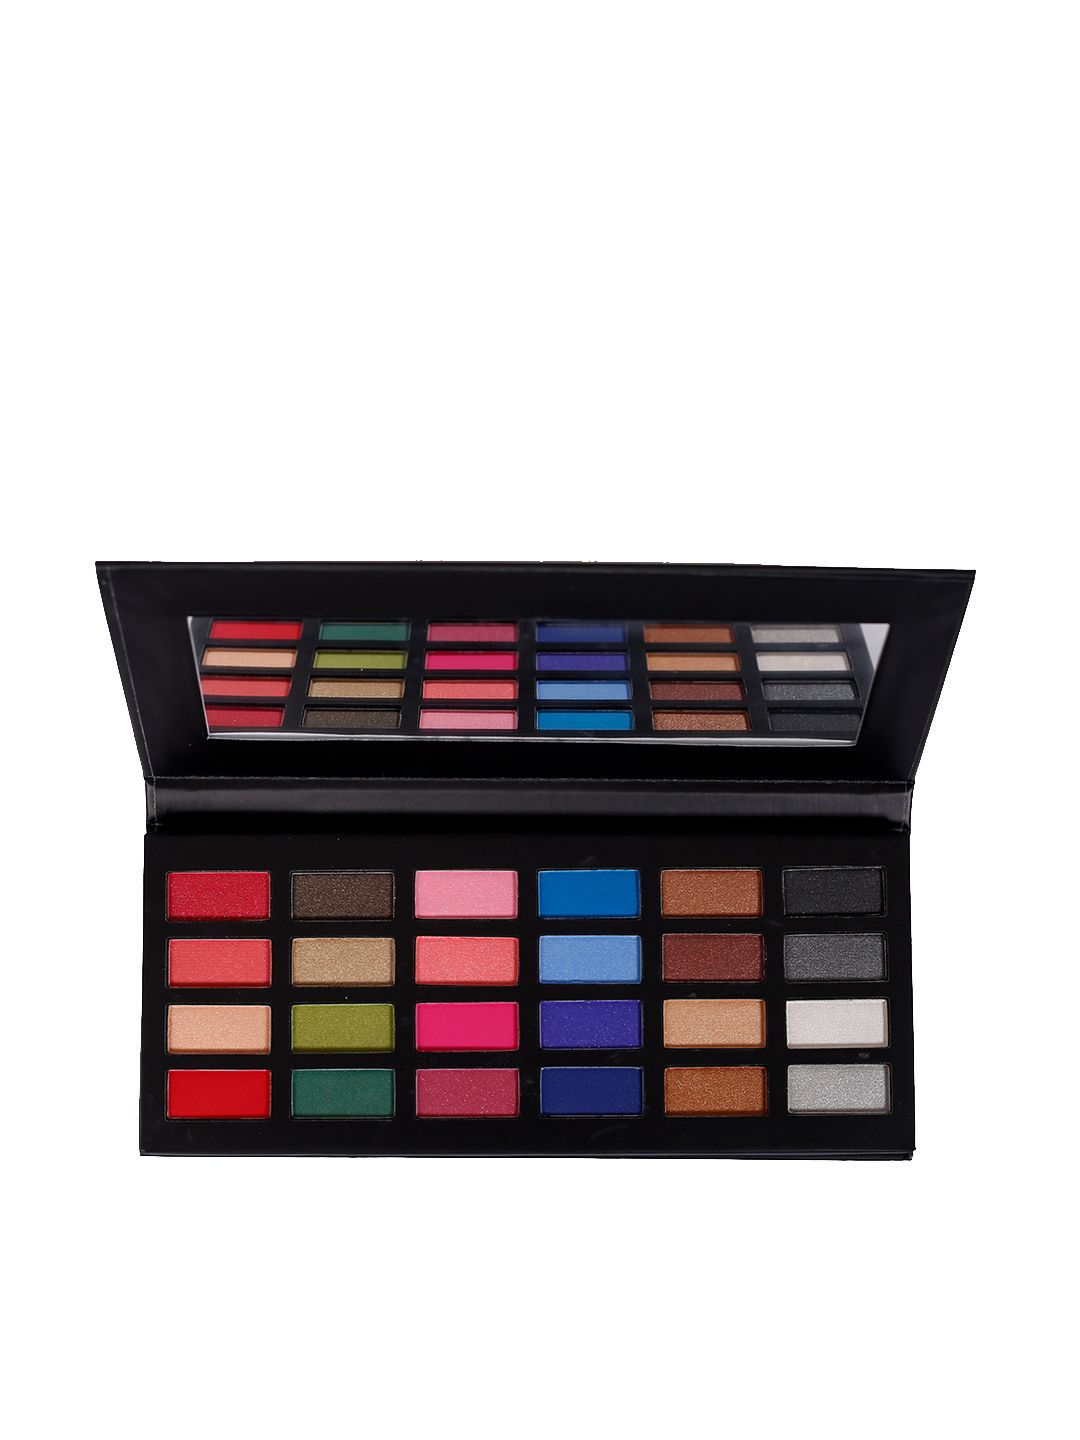 INCOLOR Dare To Nude 24 In 1 Eyeshadow Palette 02 18 g Price in India